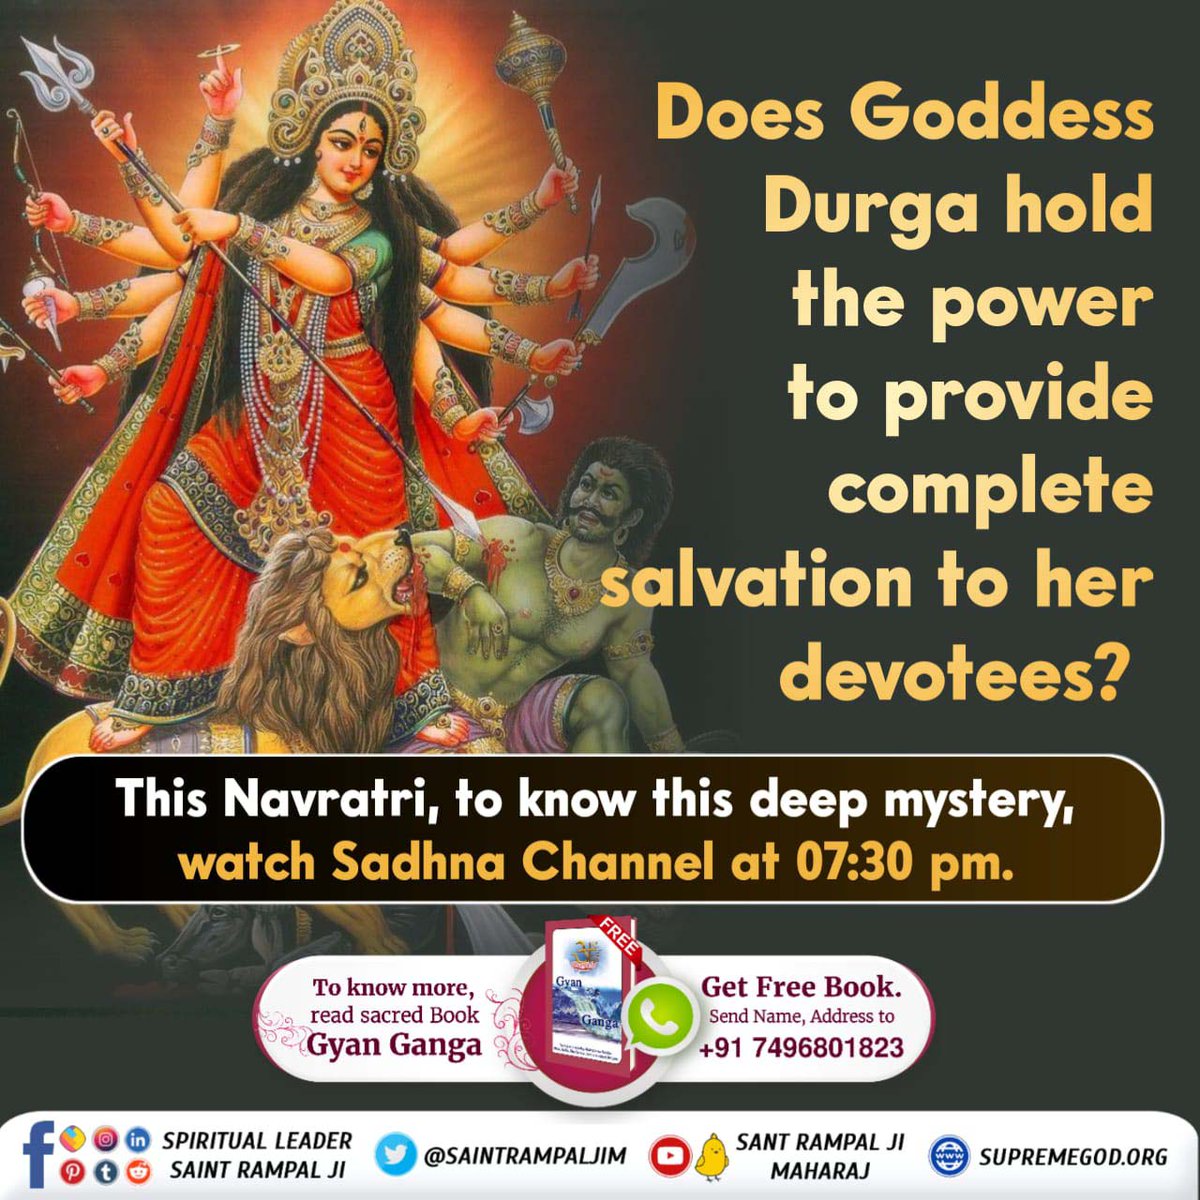 Do you know, in Shivpuran, Chapter 6 and 7, there is evidence of the origin of Vishnuji and Brahmaji from the union of Mother Durga and Father Sadashiv (KaalBrahm).#माँ_को_खुश_करनेकेलिए पढ़ें ज्ञान गंगा